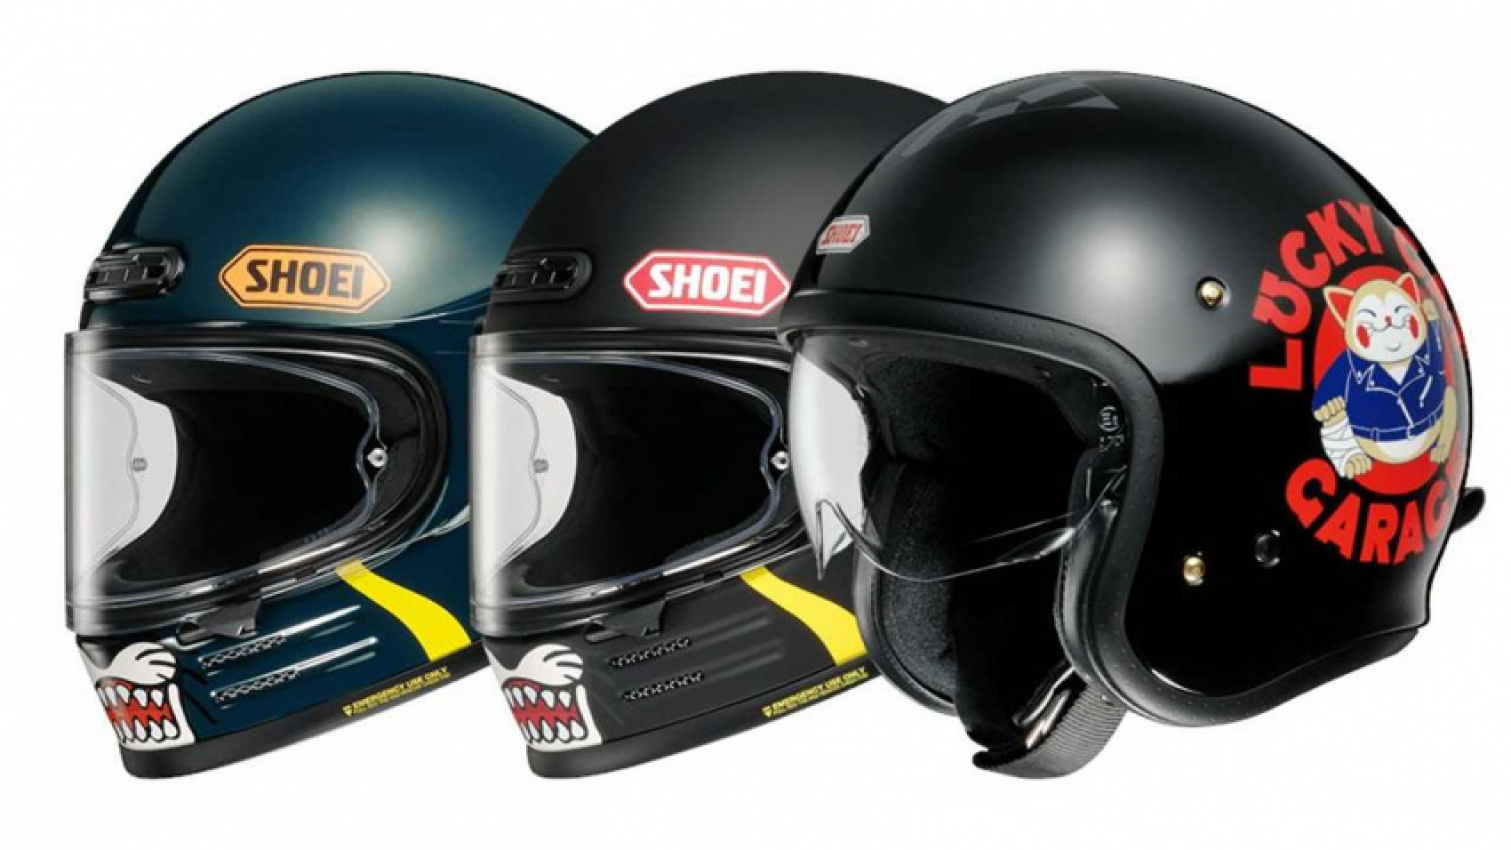 The Shoei Glamster And JO Helmets Get Limited-Edition Graphics - TopCarNews